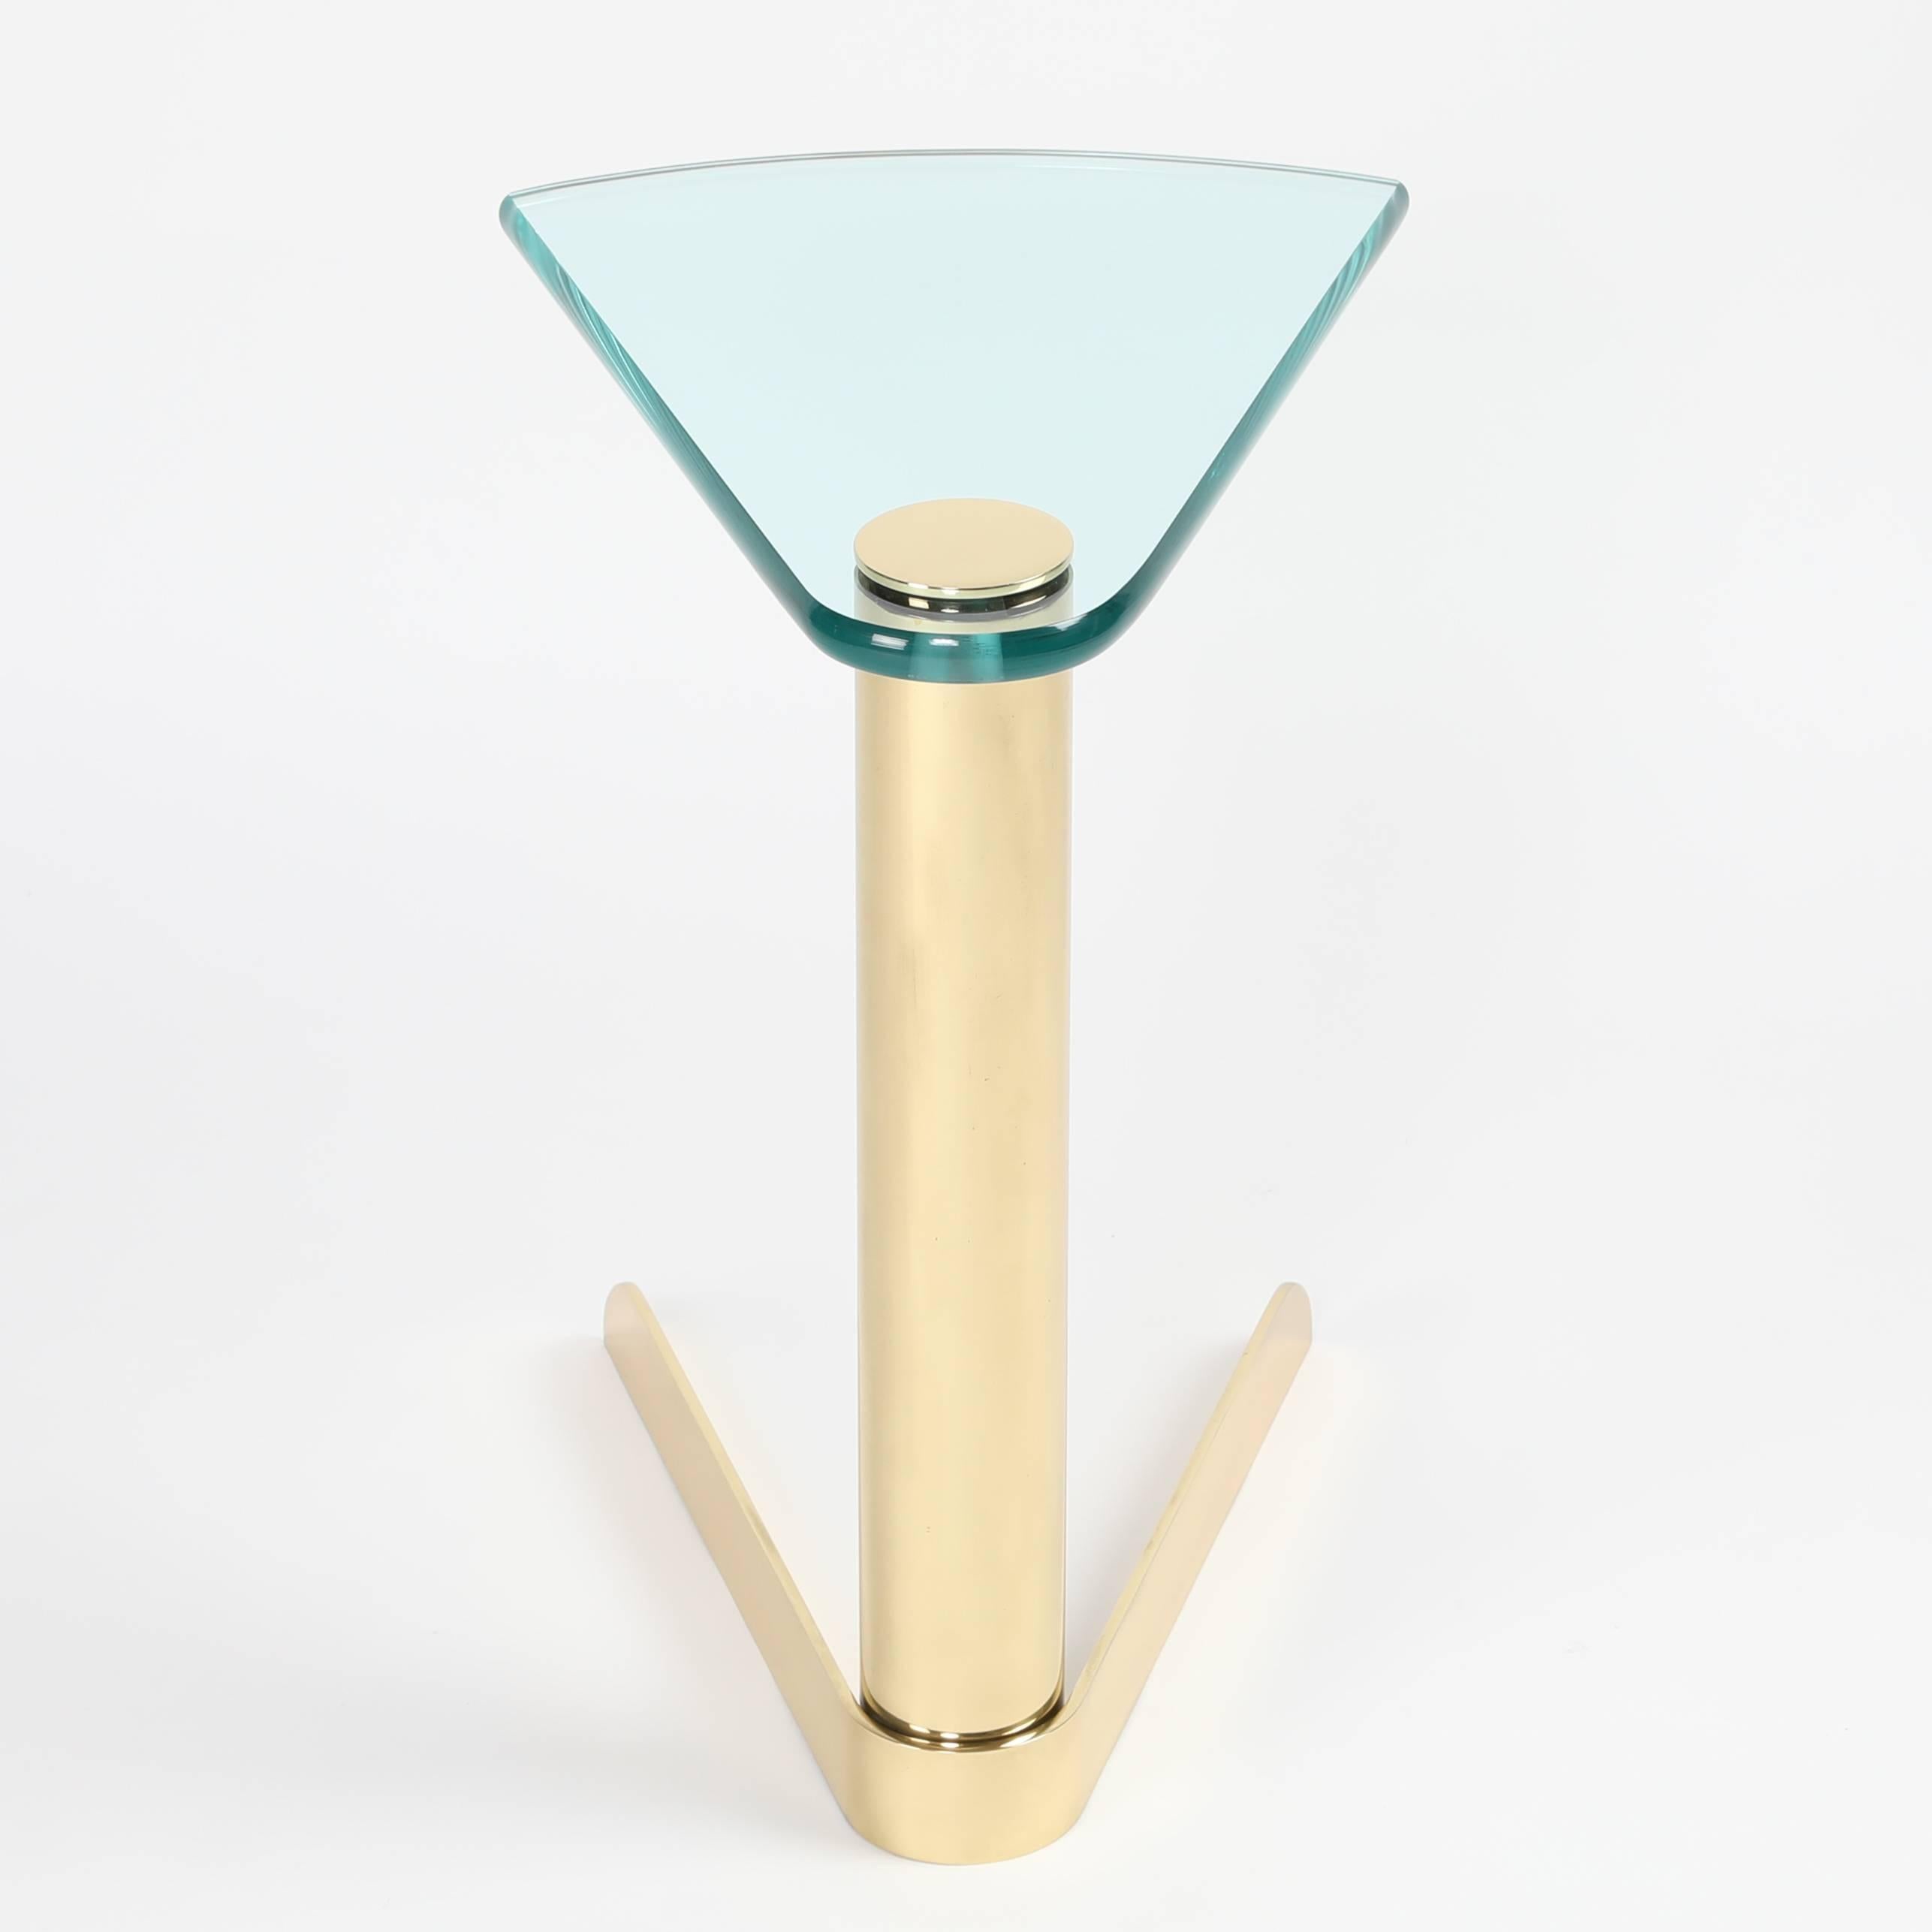 Late 20th Century 1970s Wedge-Shaped Occasional Table in Brass and Glass by Pace Furniture